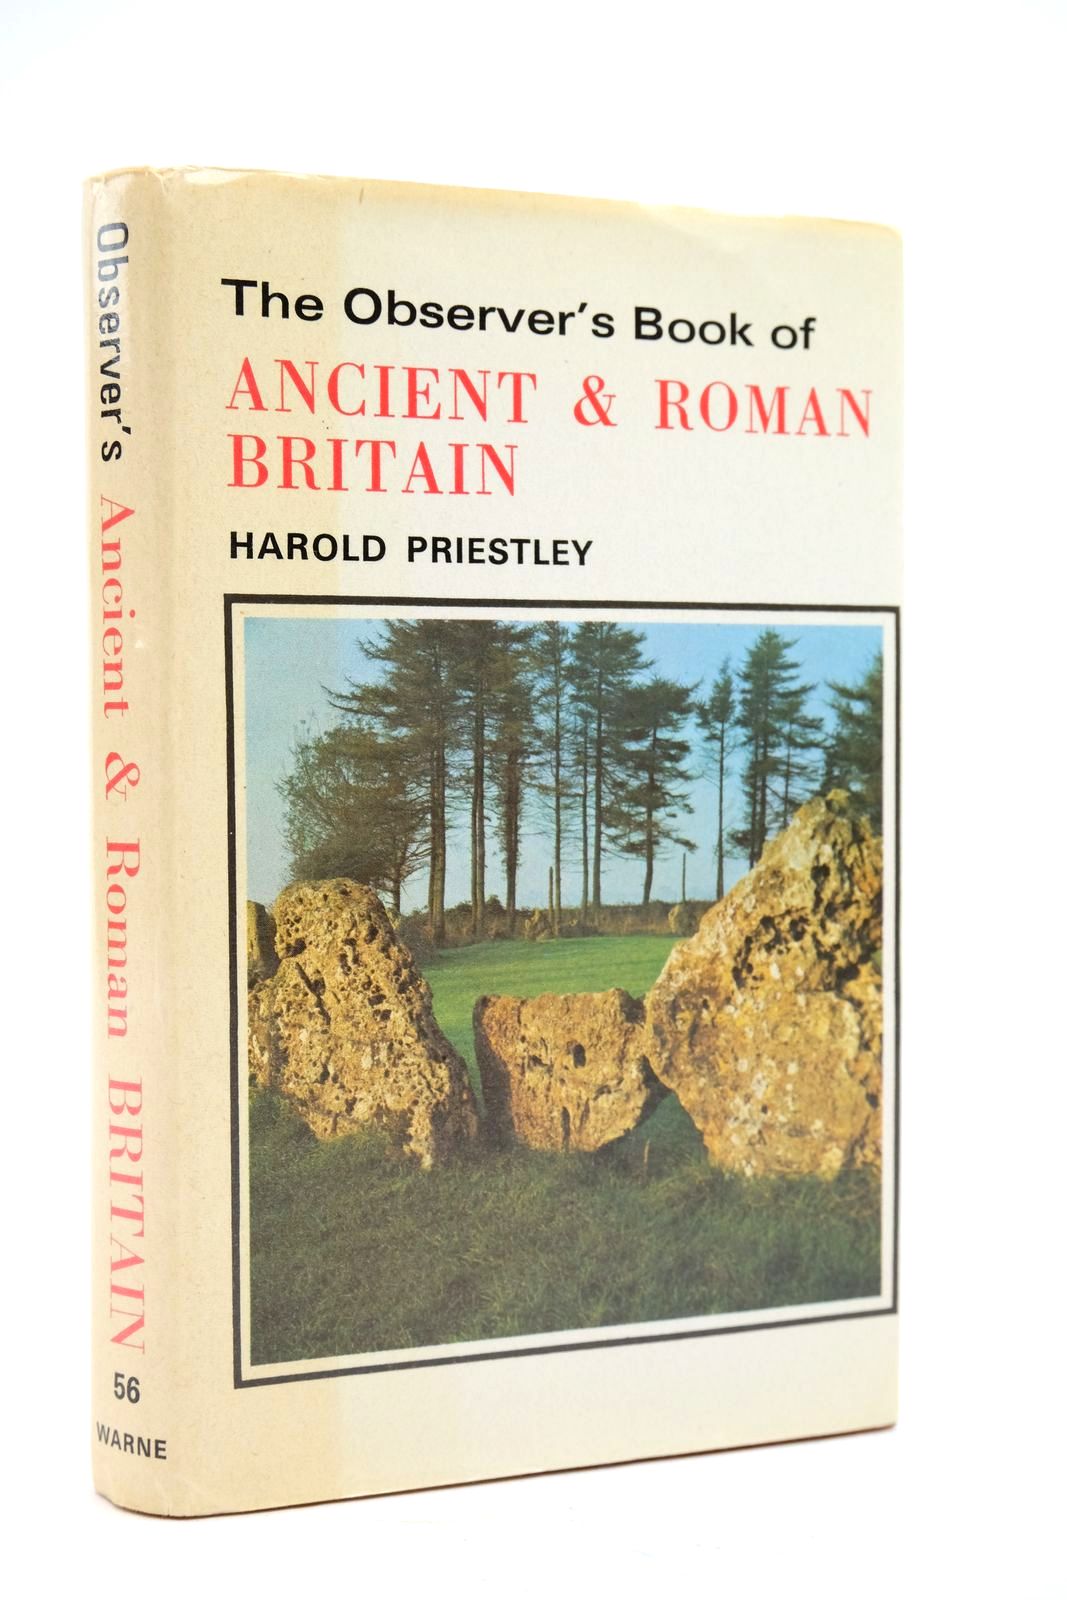 Photo of THE OBSERVER'S BOOK OF ANCIENT AND ROMAN BRITAIN written by Priestley, Harold published by Frederick Warne & Co Ltd. (STOCK CODE: 2140973)  for sale by Stella & Rose's Books